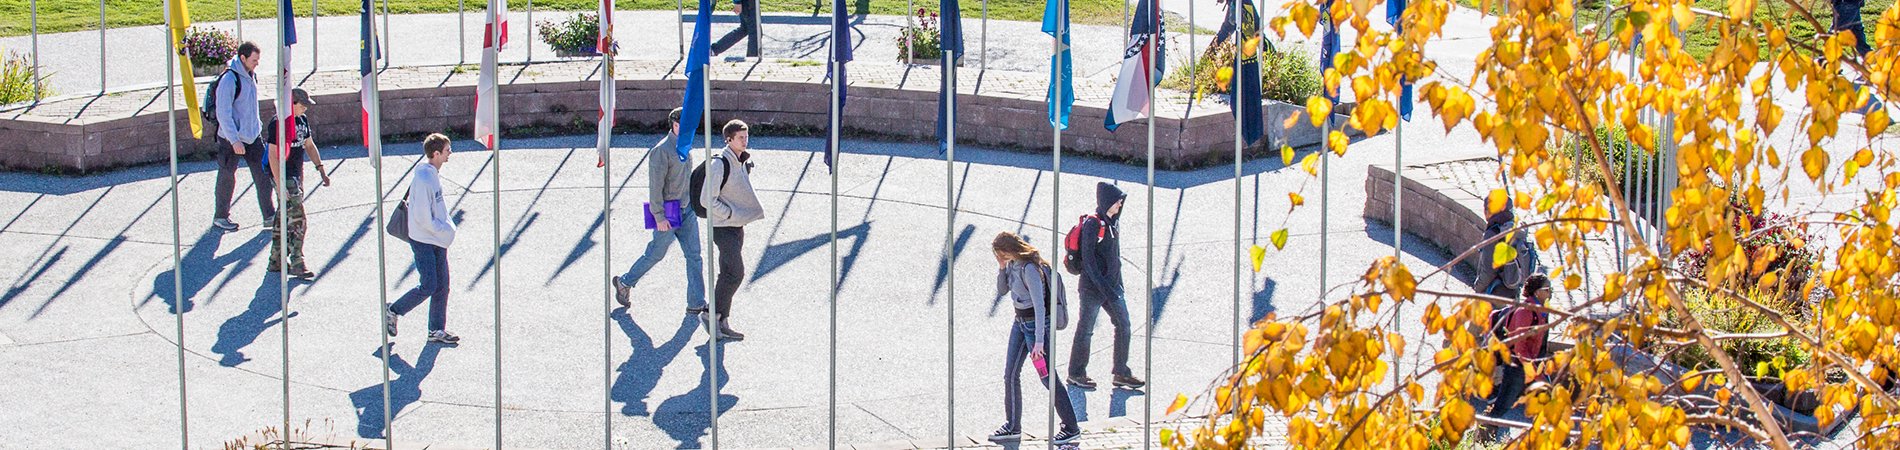 Students crossing University of Alaska campus on a fall day.